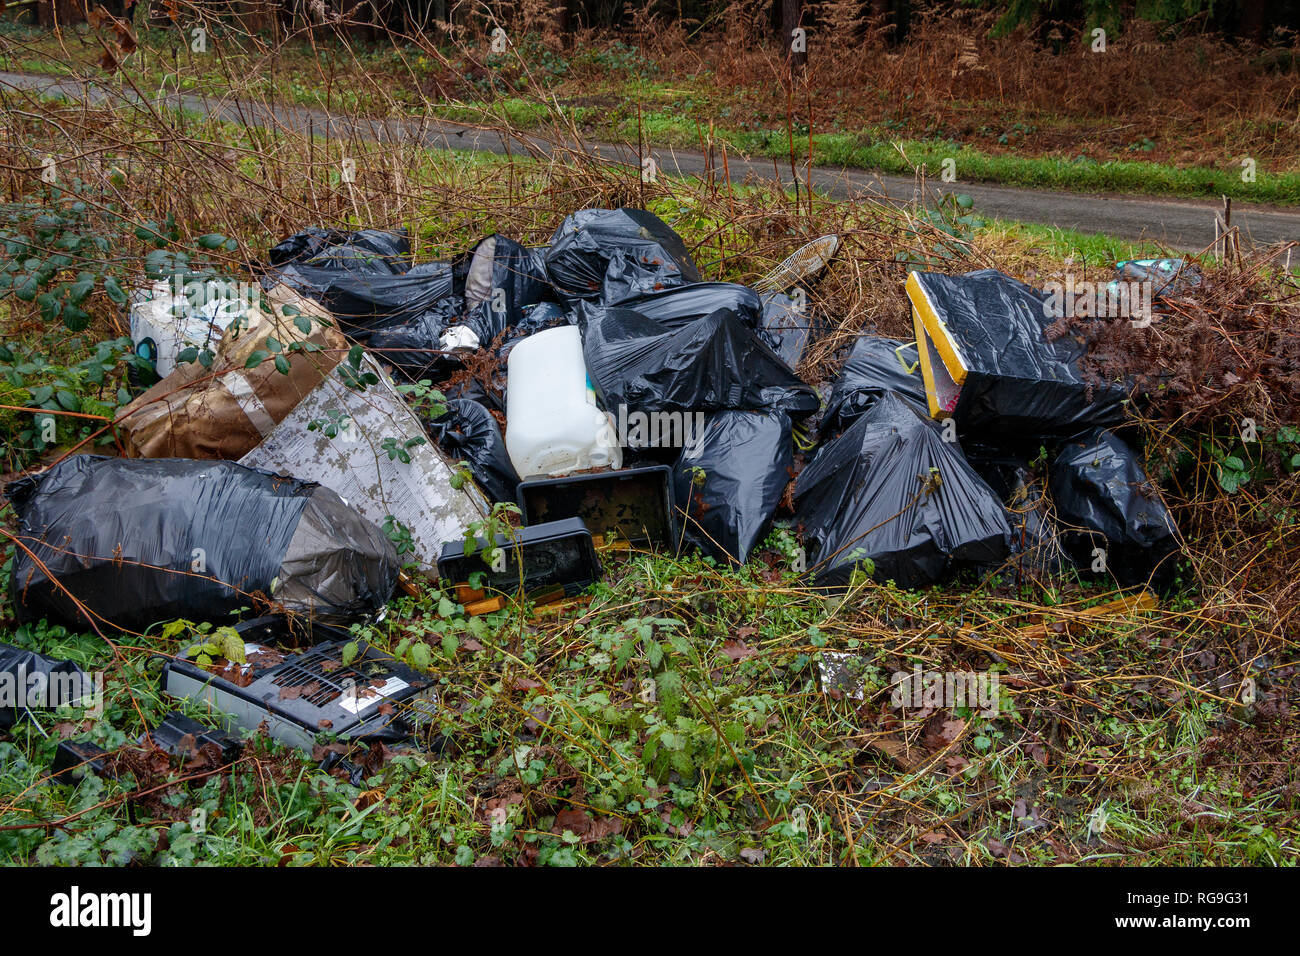 Illegal fly-tipping in the rural environment of the Norfolk, countryside, UK. Black sacks of household rubbish and additional materials. Stock Photo